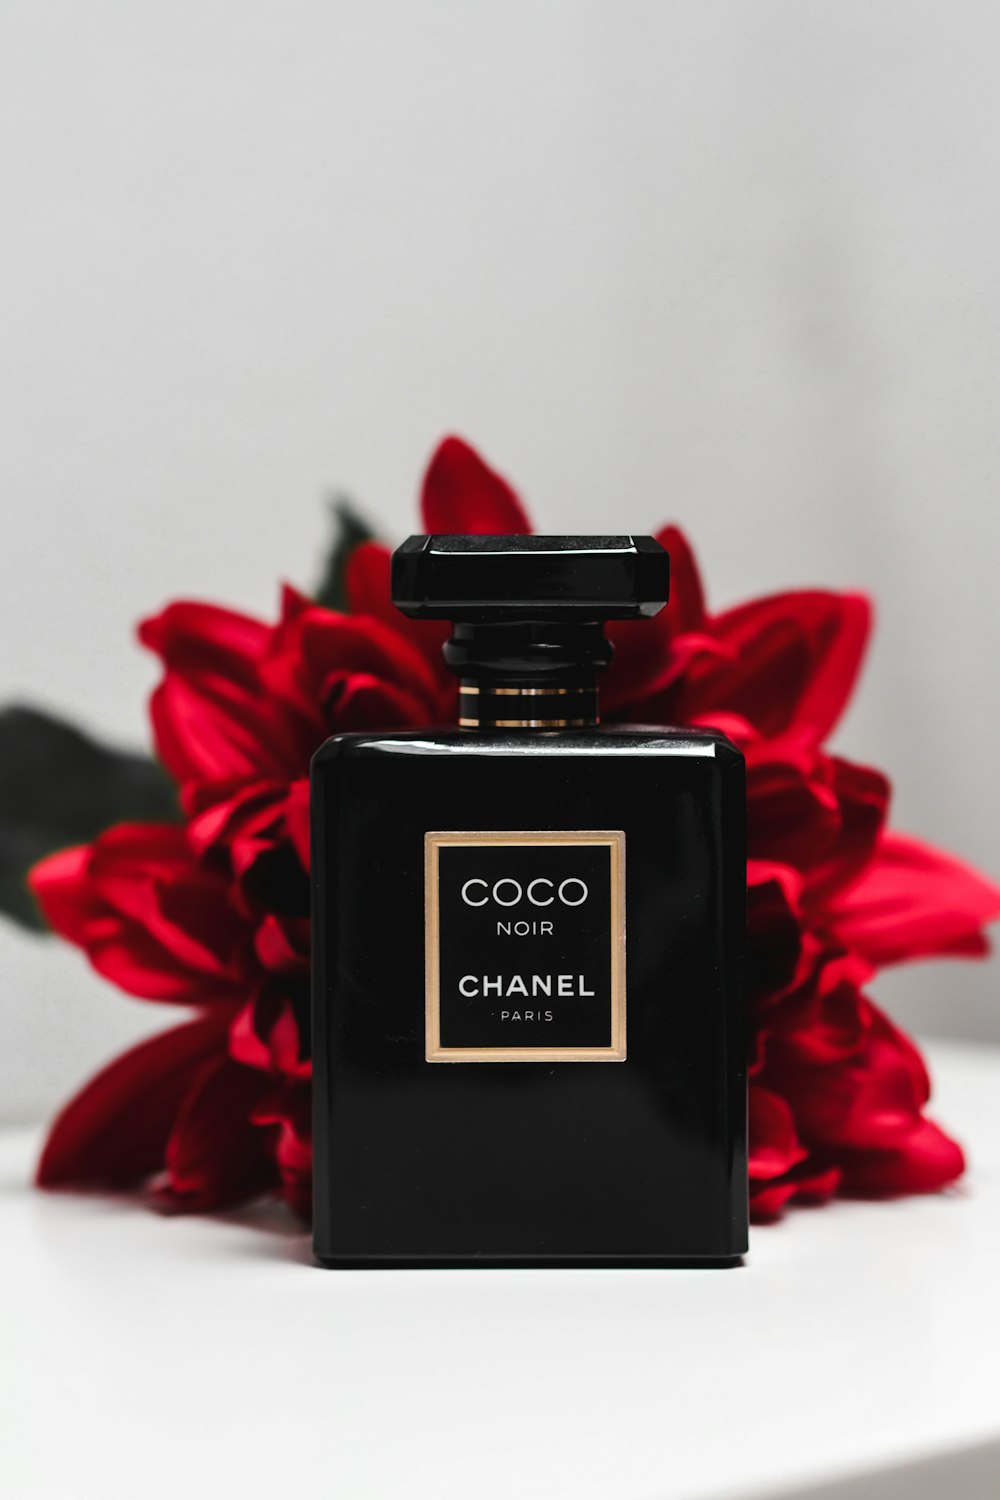 Coco Chanel Pictures | Download Free Images & Stock Photos on Unsplash